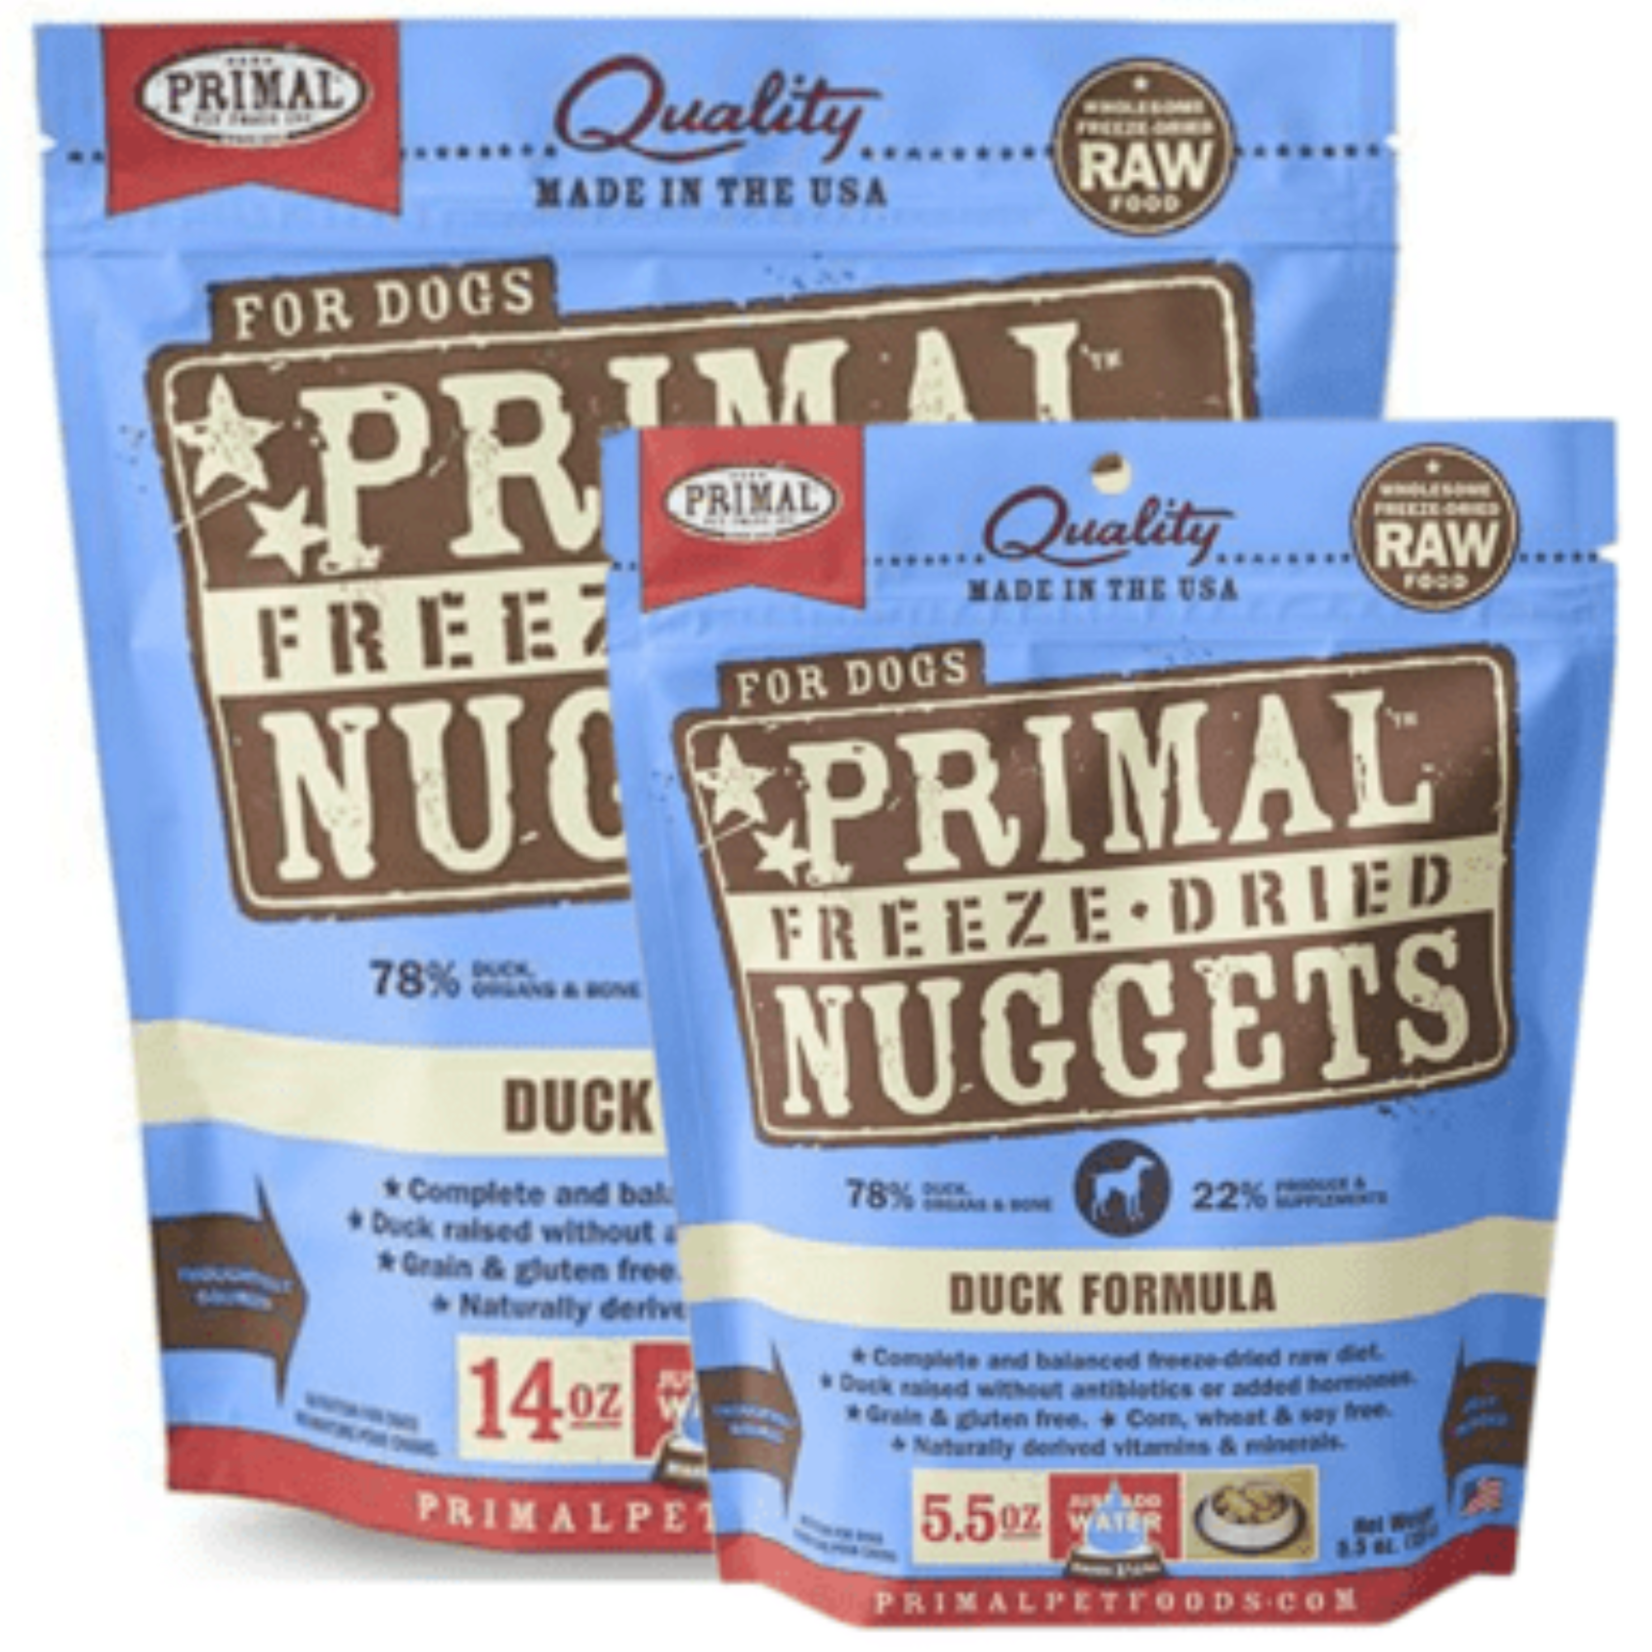 Primal Primal: Freeze-Dried Nuggets: Duck